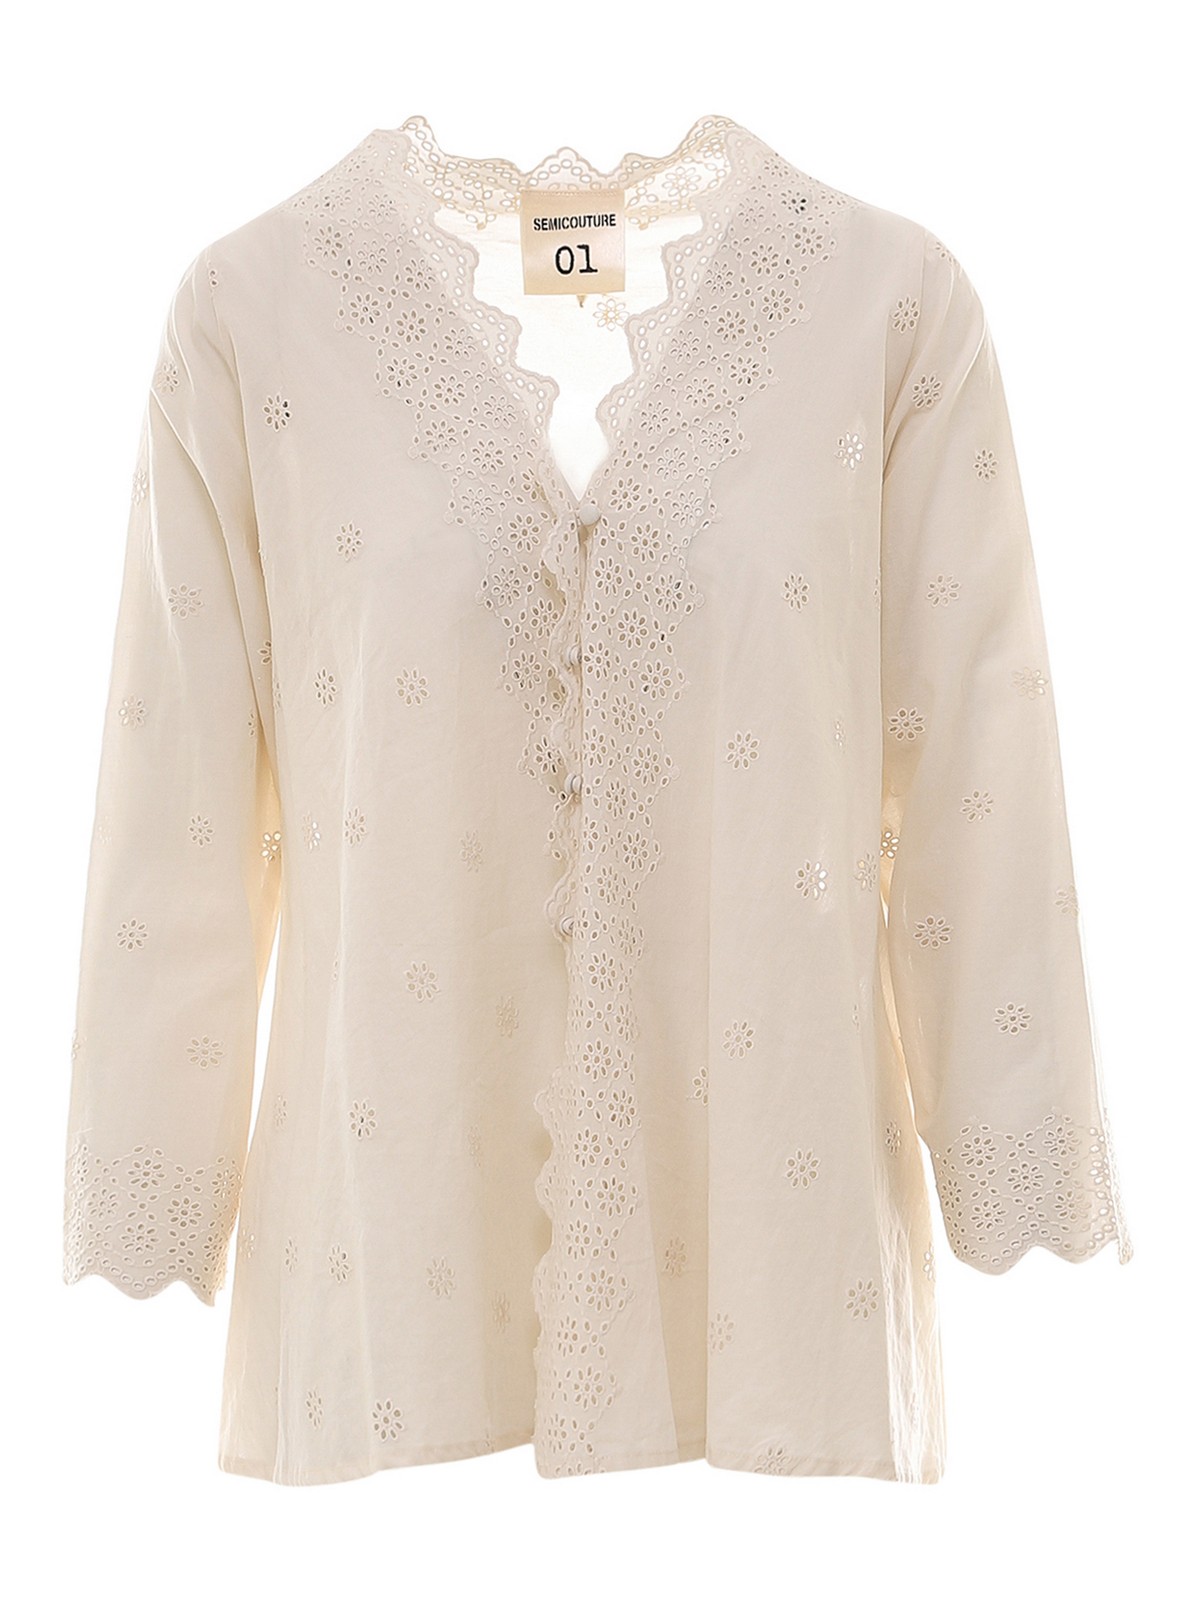 Semicouture - Broderie anglaise shirt - shirts - Y1SI10A10 | iKRIX.com